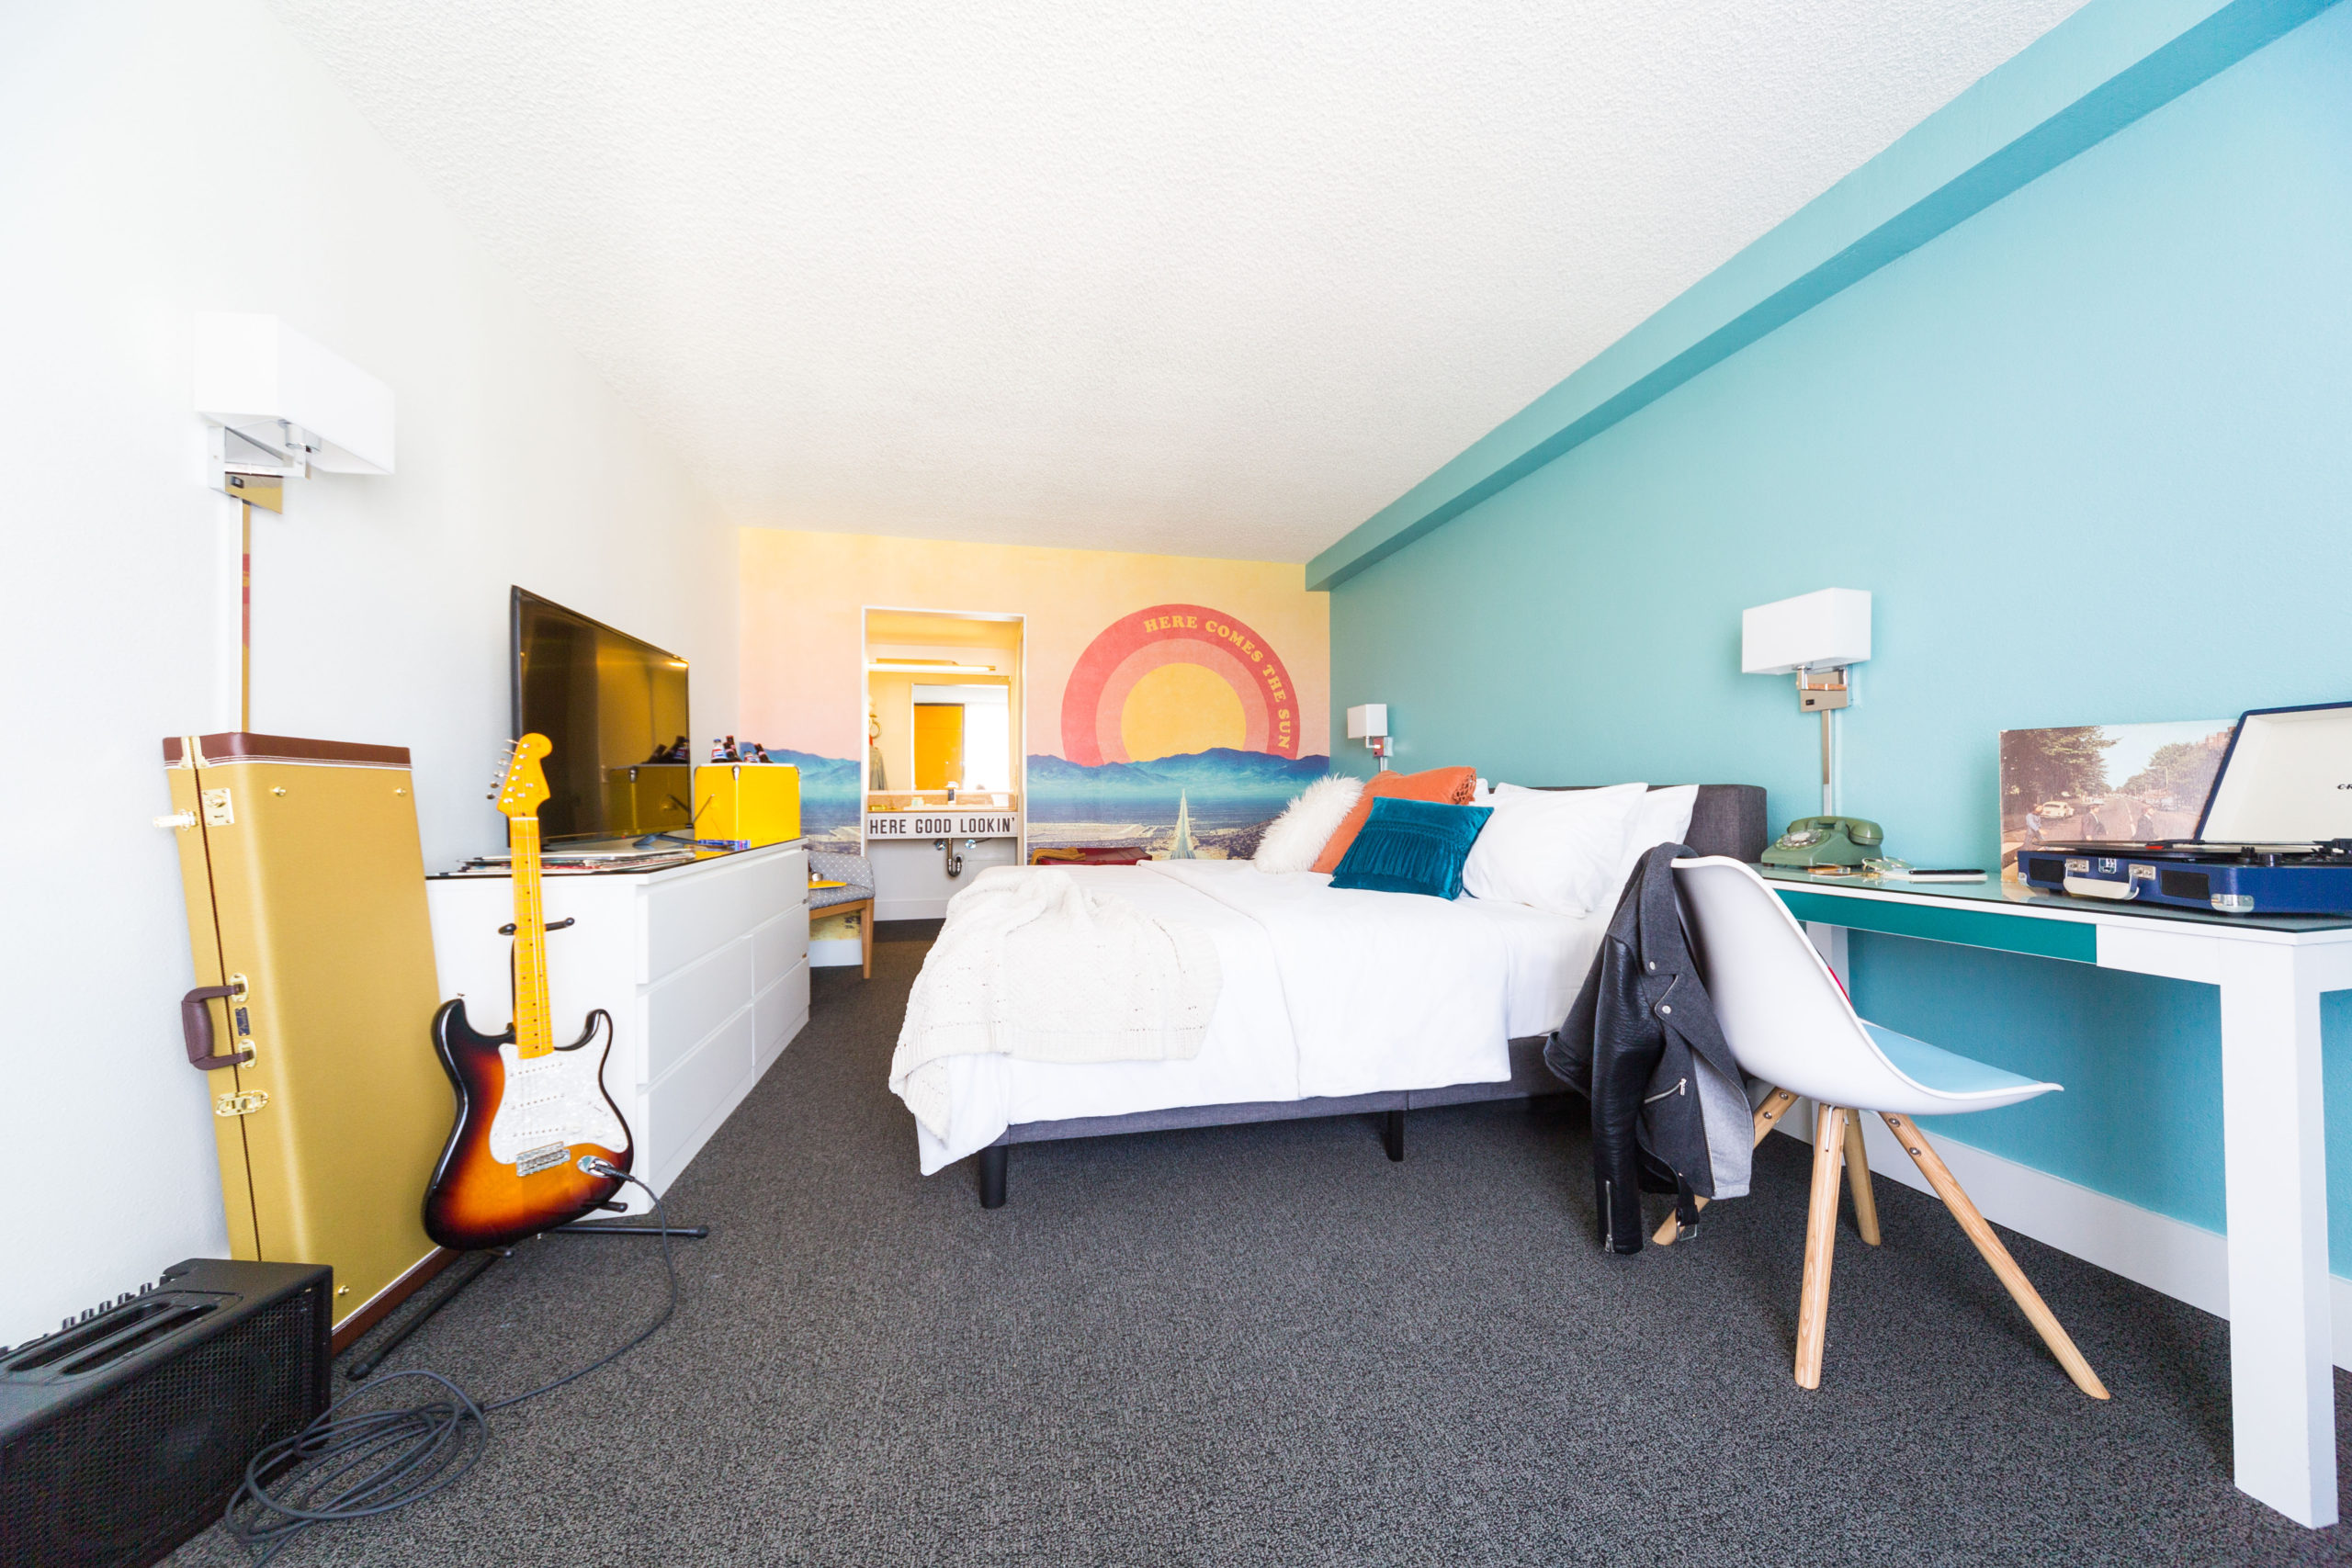 Here Comes the Sun Rambler Motel guestroom with record player and guitar set up